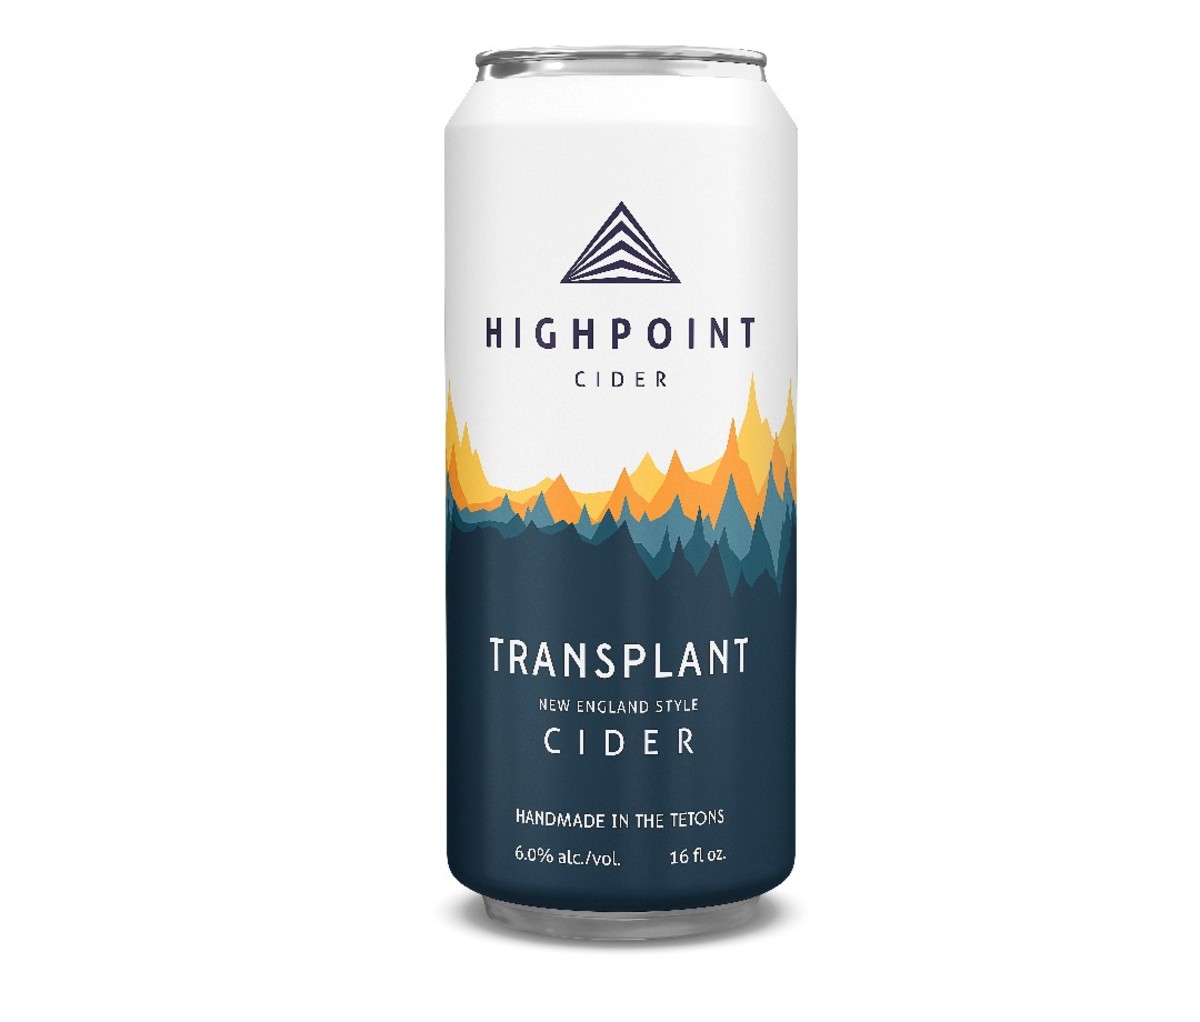 Tall can of Highpoint Cider Transplant